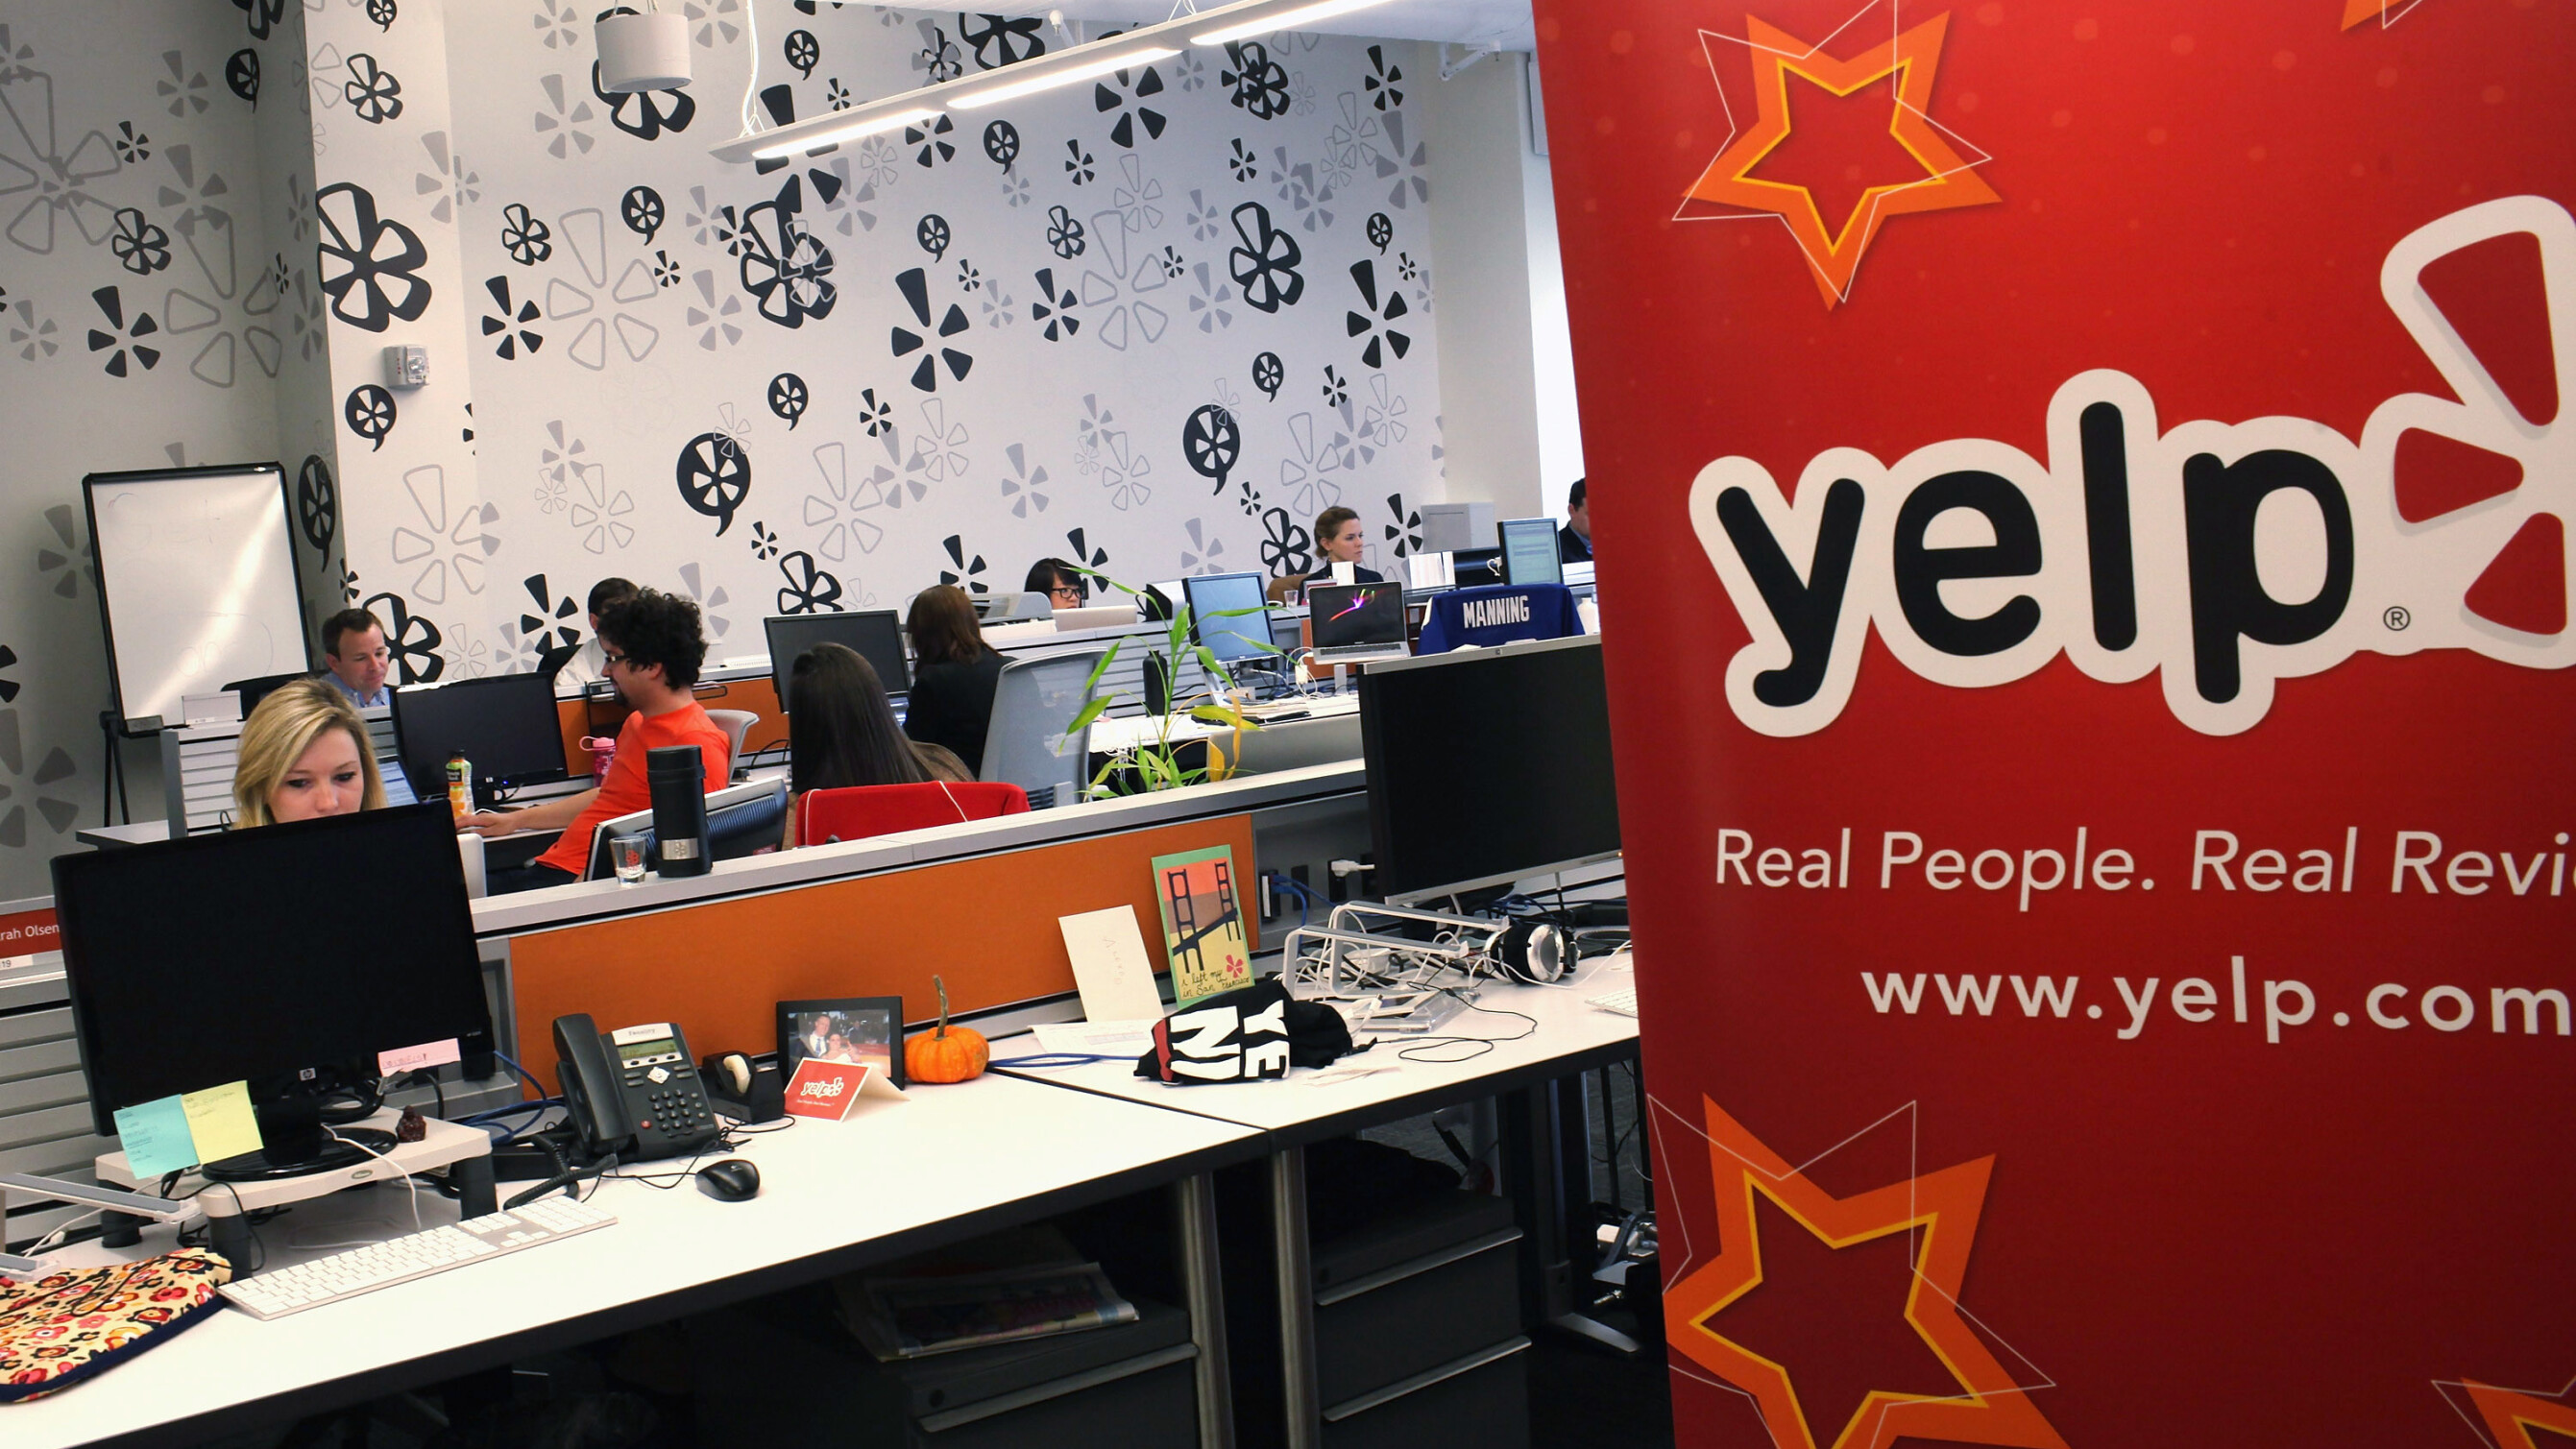 After acquiring the online reservation startup, Yelp adds option to book SeatMe reservations from its listings